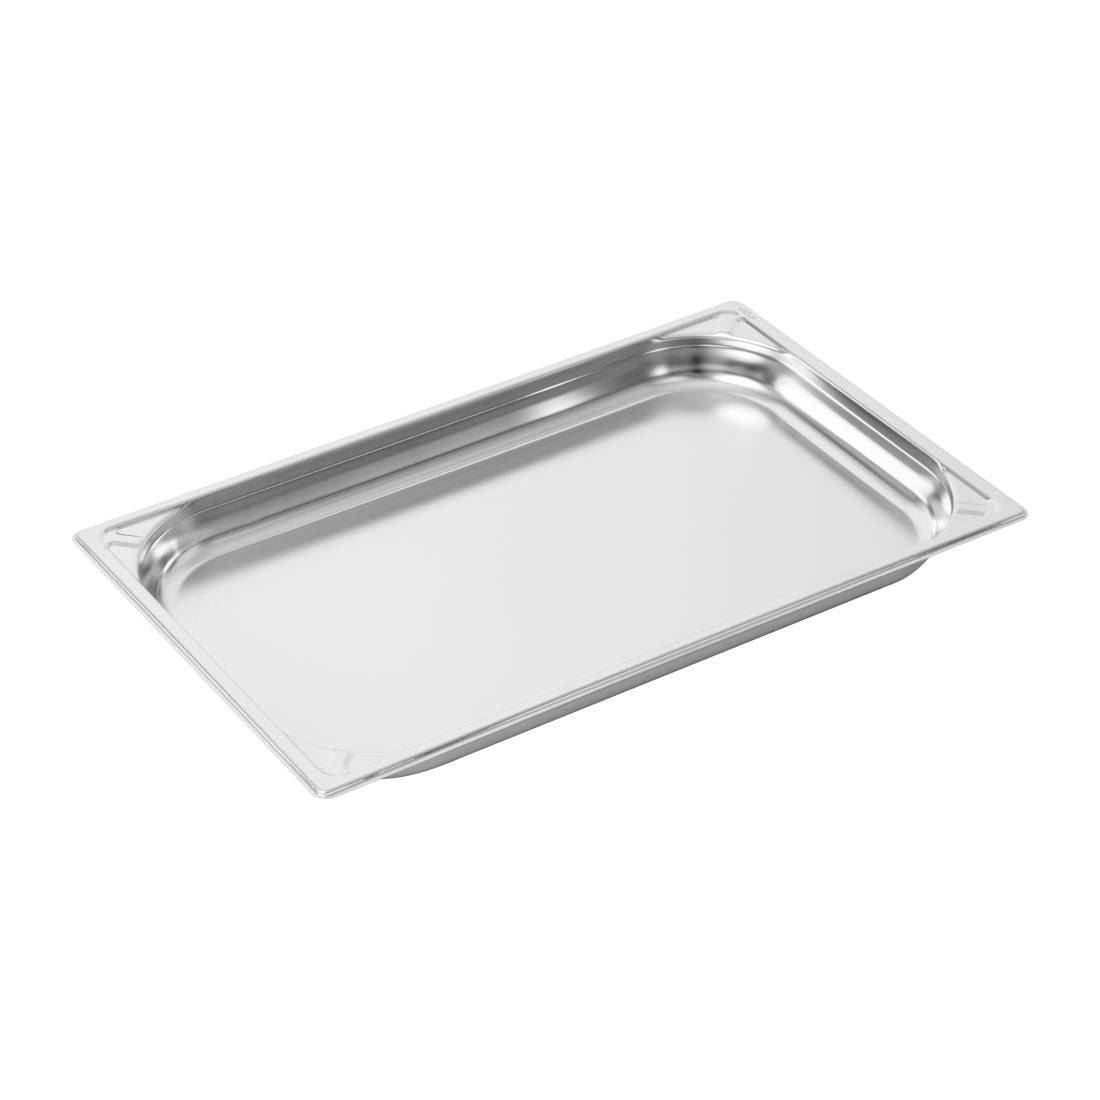 Vogue Heavy Duty Stainless Steel 1/1 Gastronorm Pan 40mm